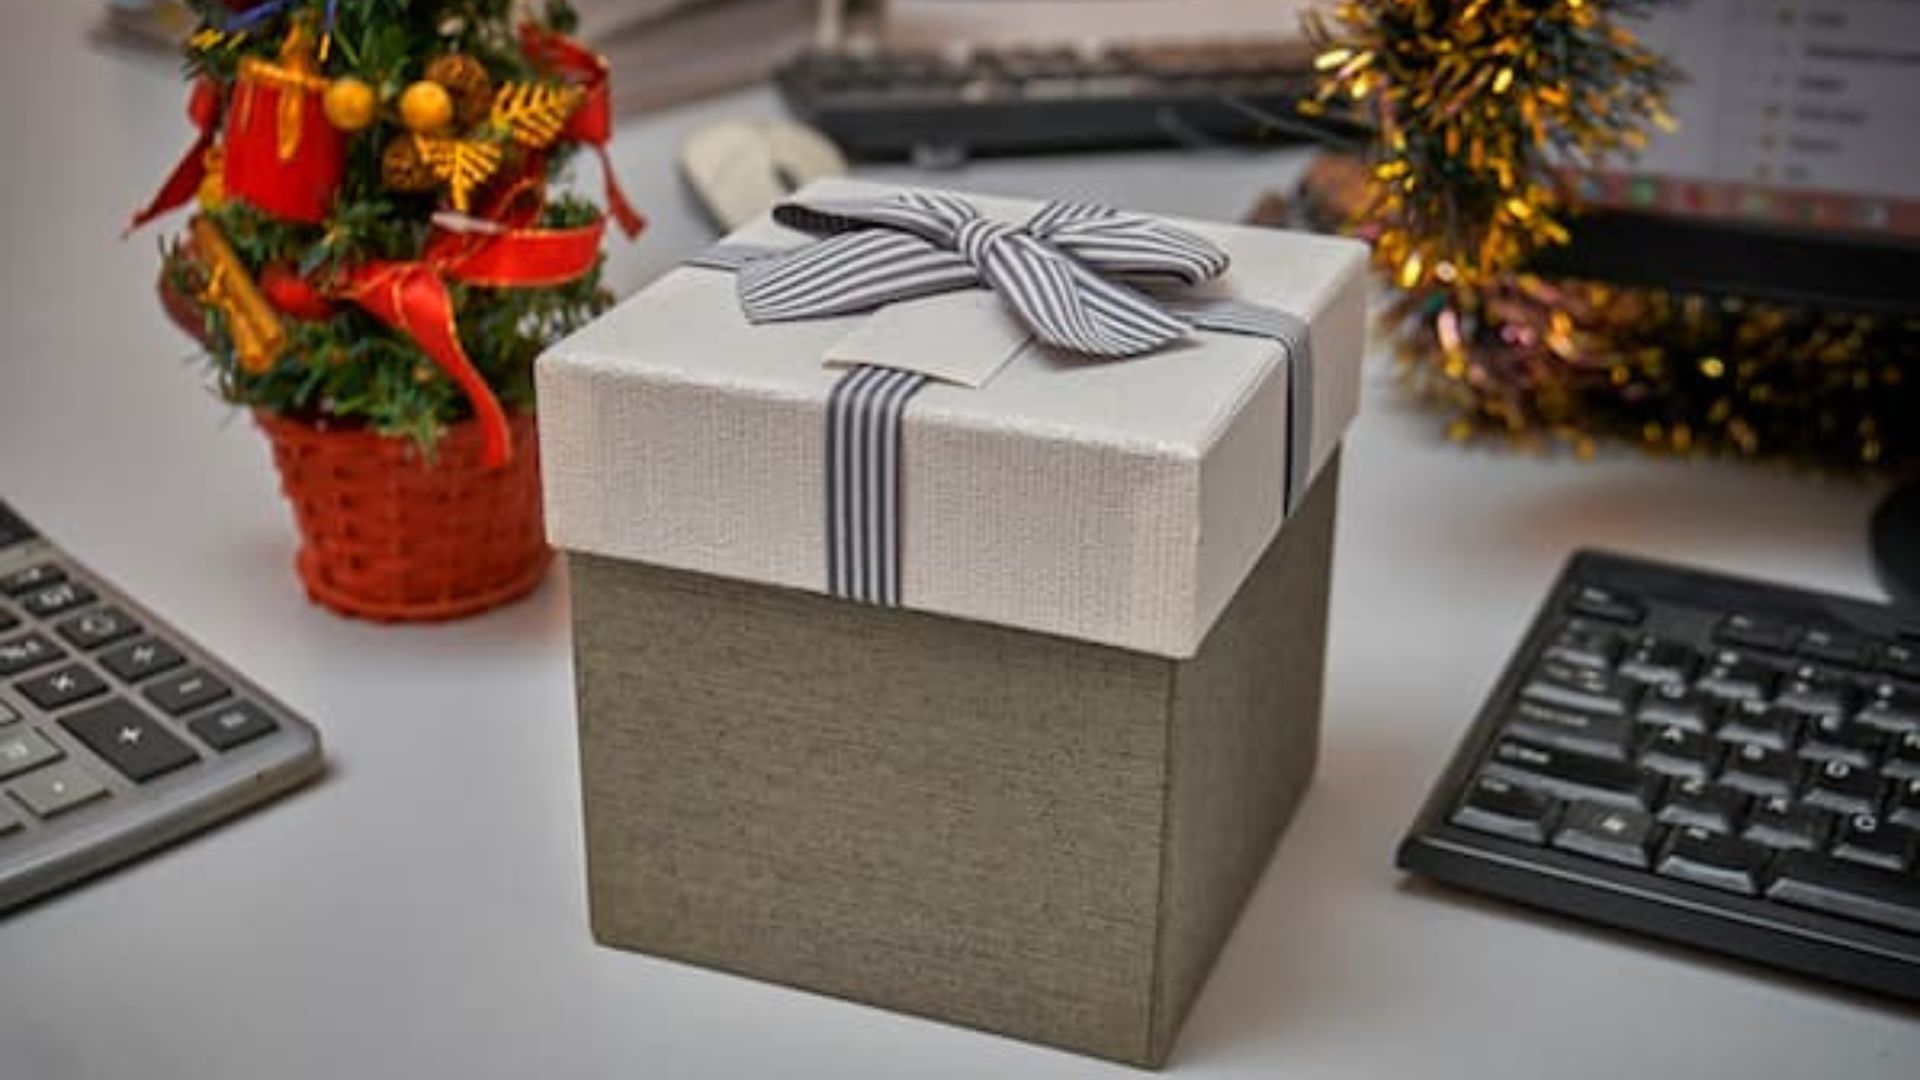 Secret Santa Gift in a grey box and laptops and flowers in the background